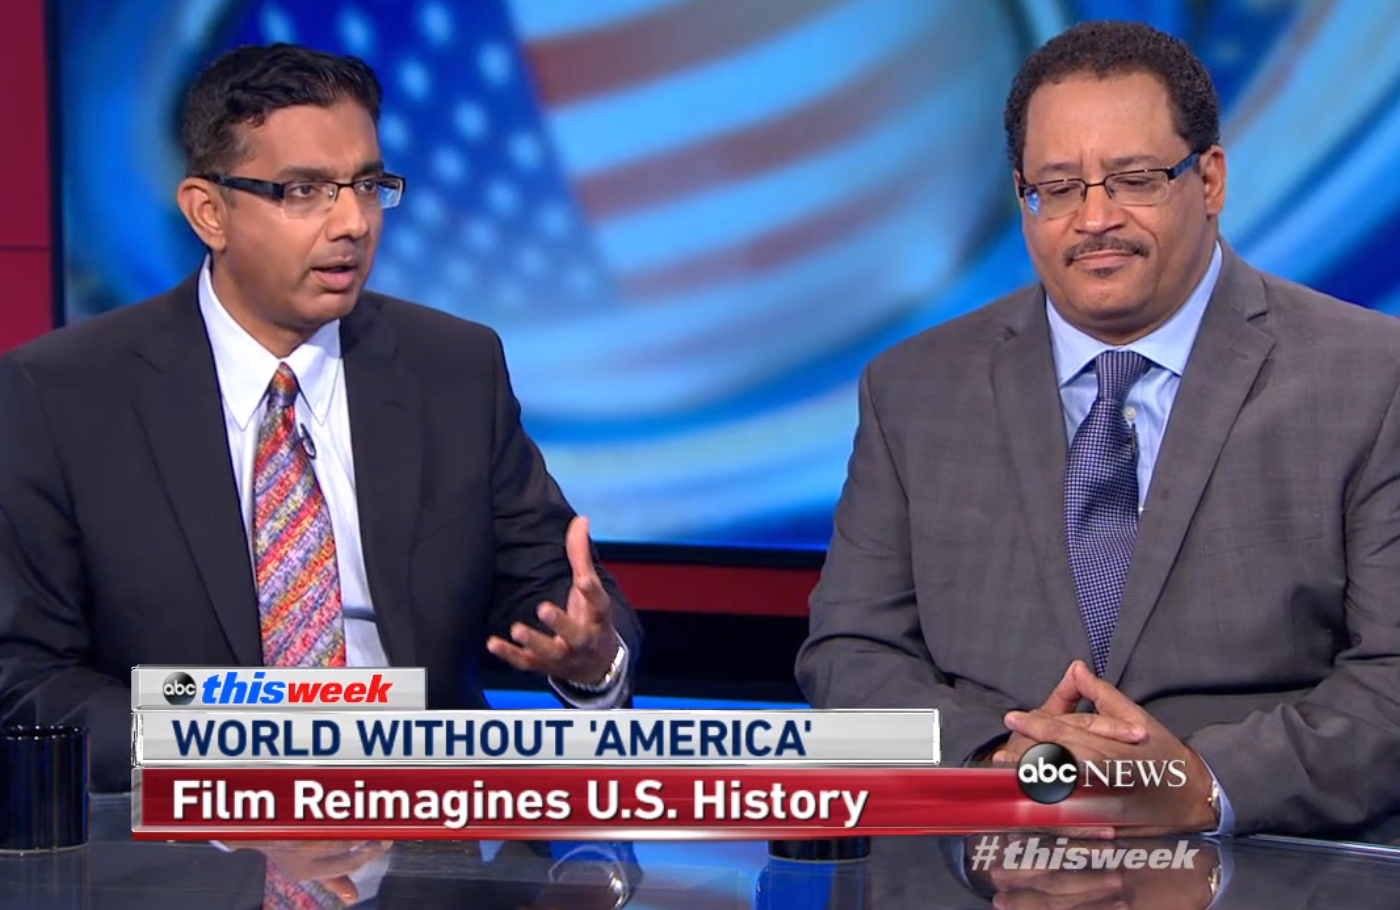 ABC News Helps Dinesh D’Souza Hype His Latest Conspiracy Theory